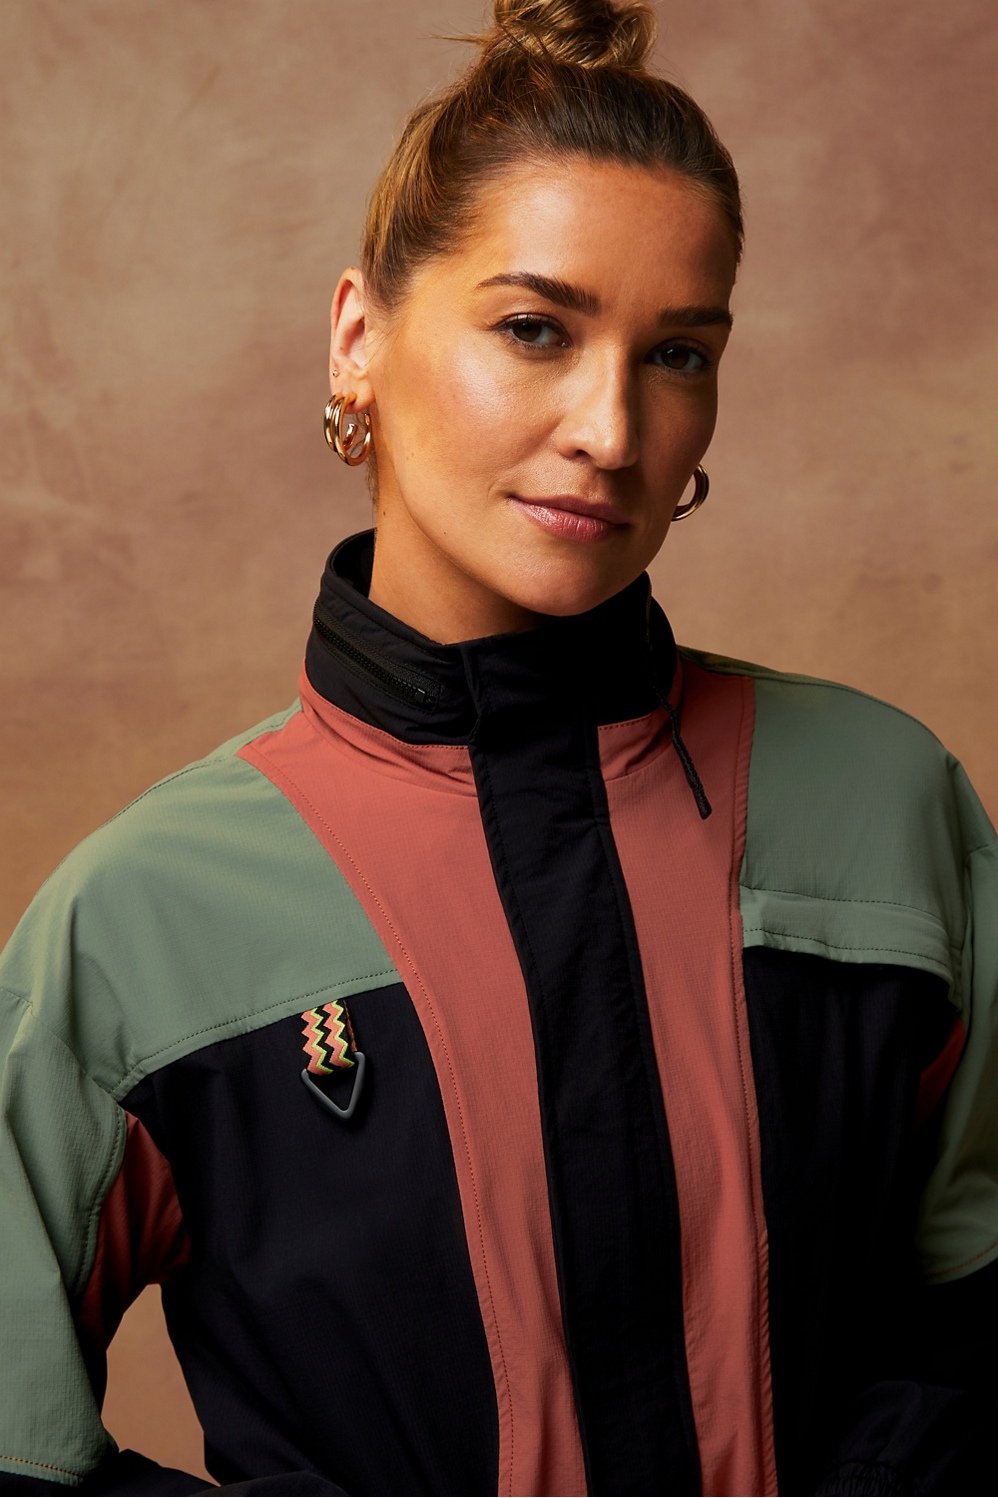 The Heights Cargo Jacket - Fabletics